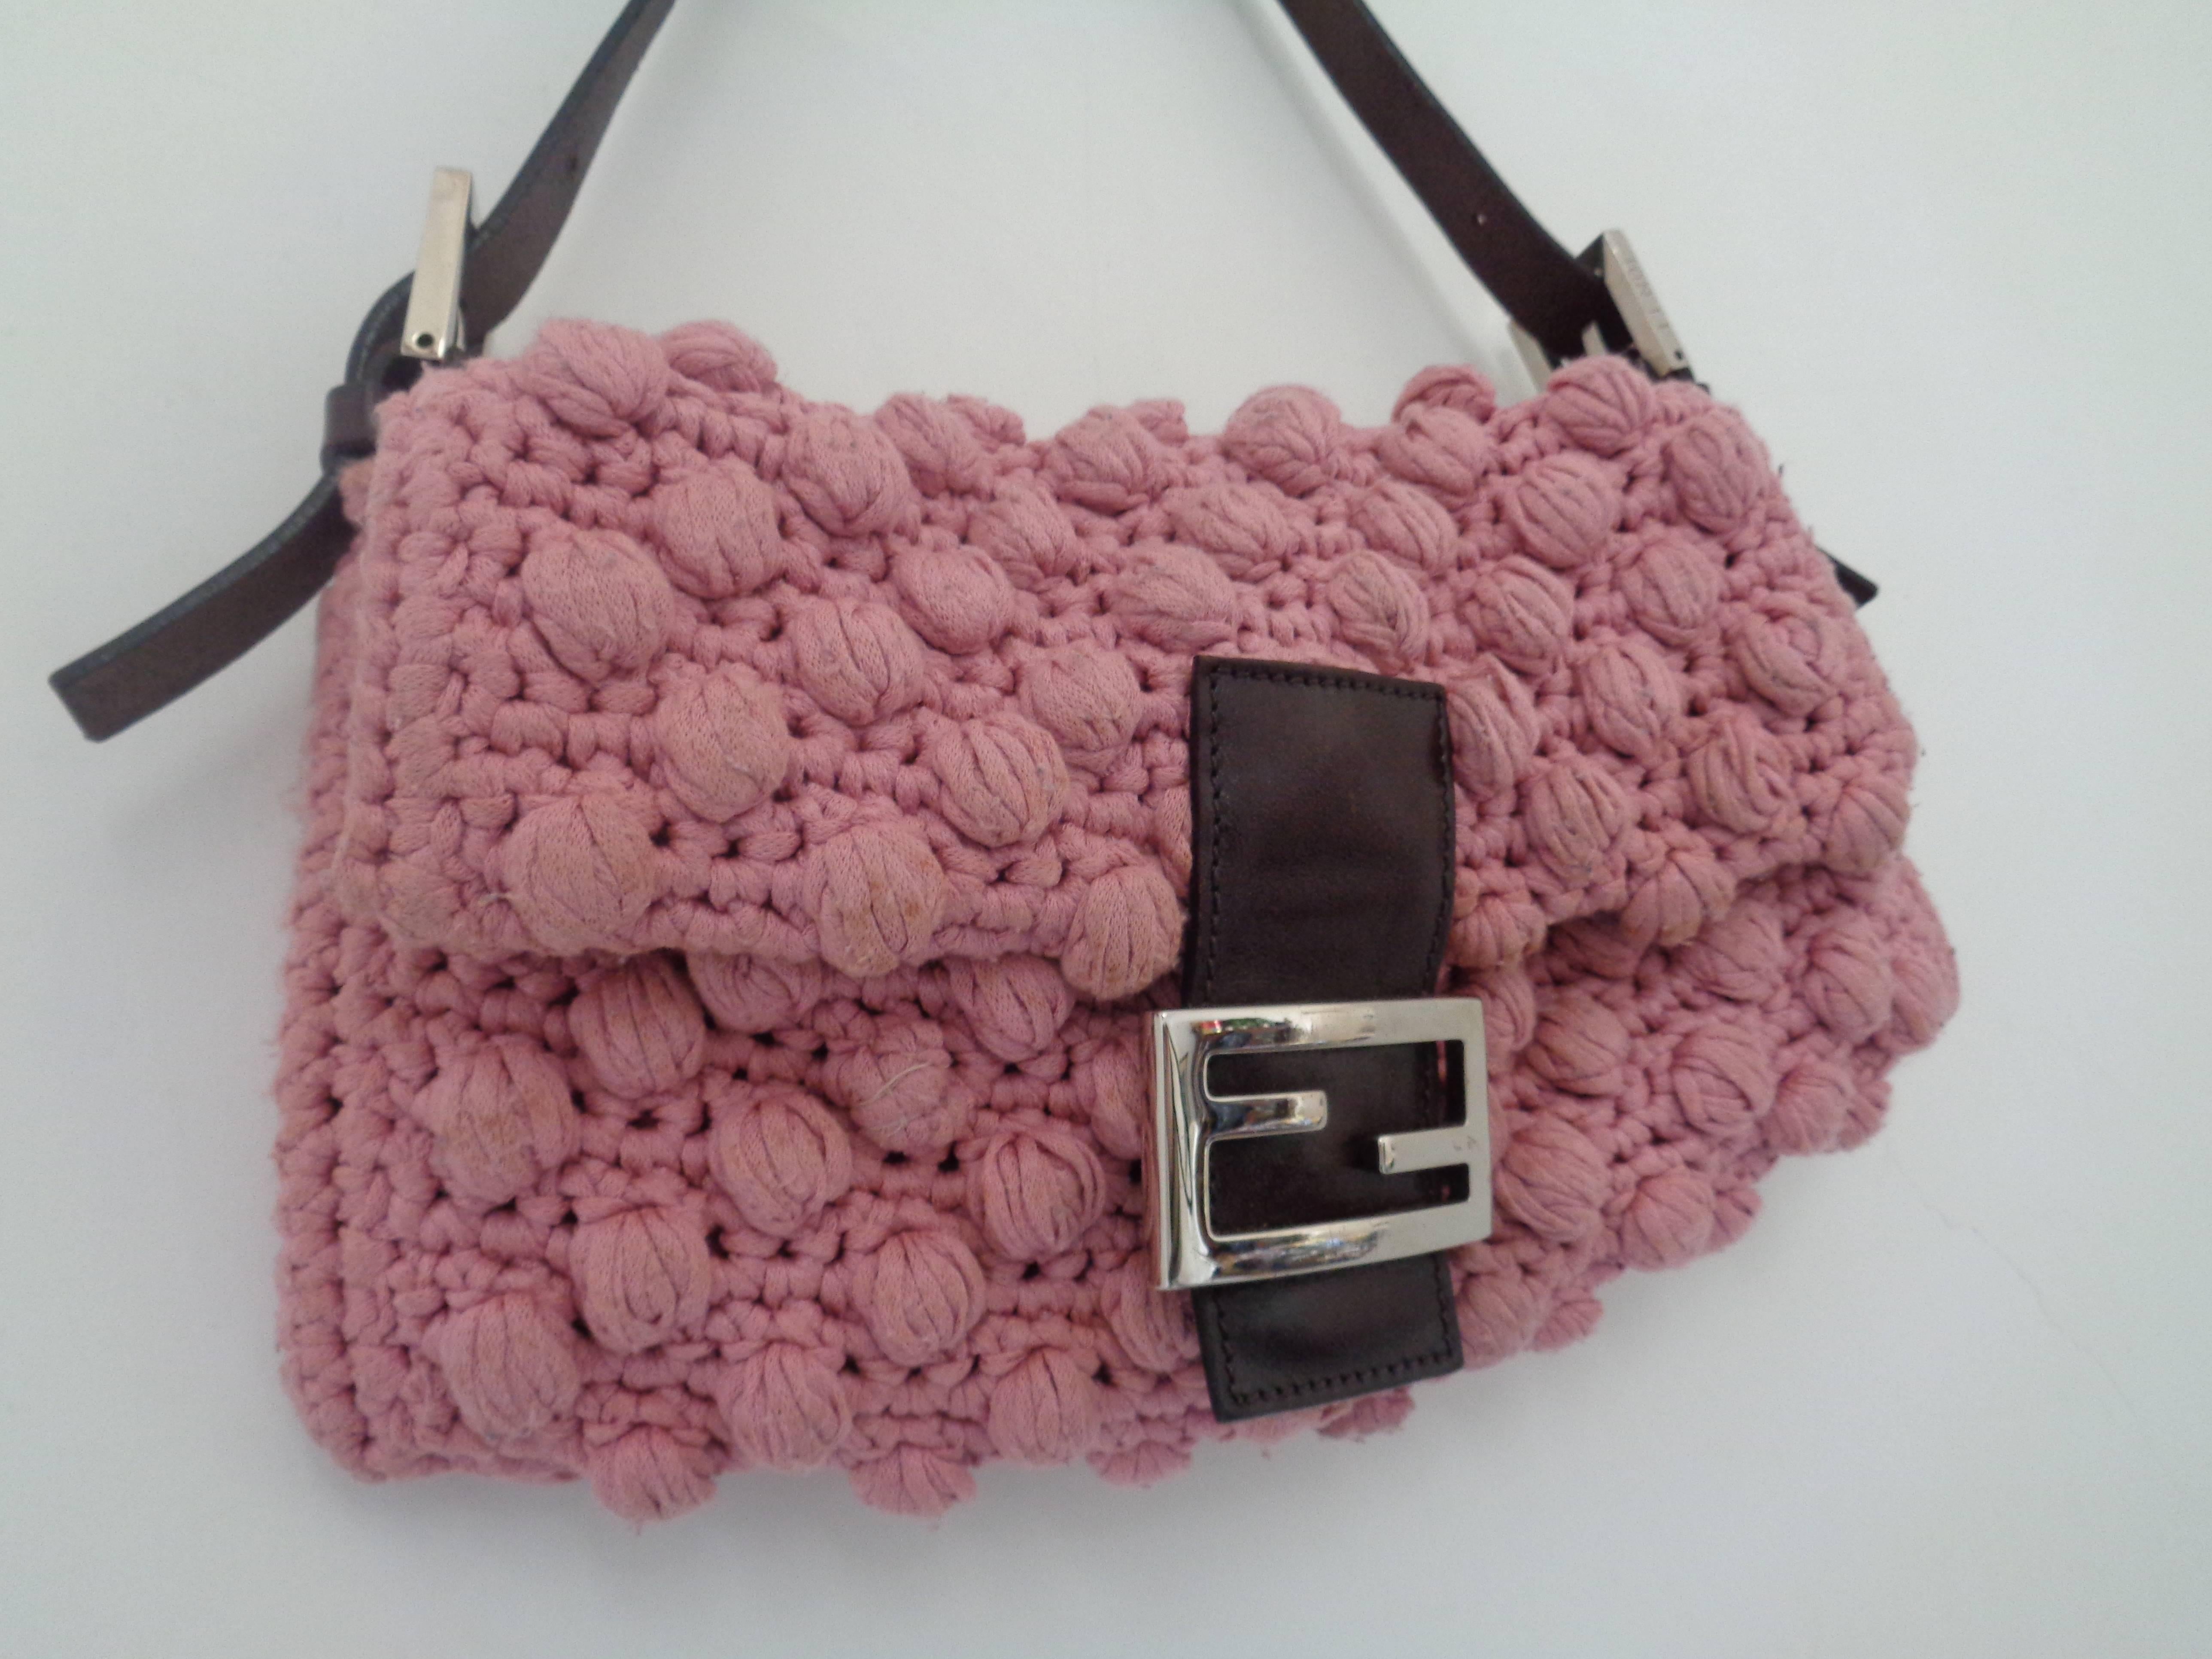 Fendi Pink Wool Brown Leather Baguette Bag

Totally made in italy